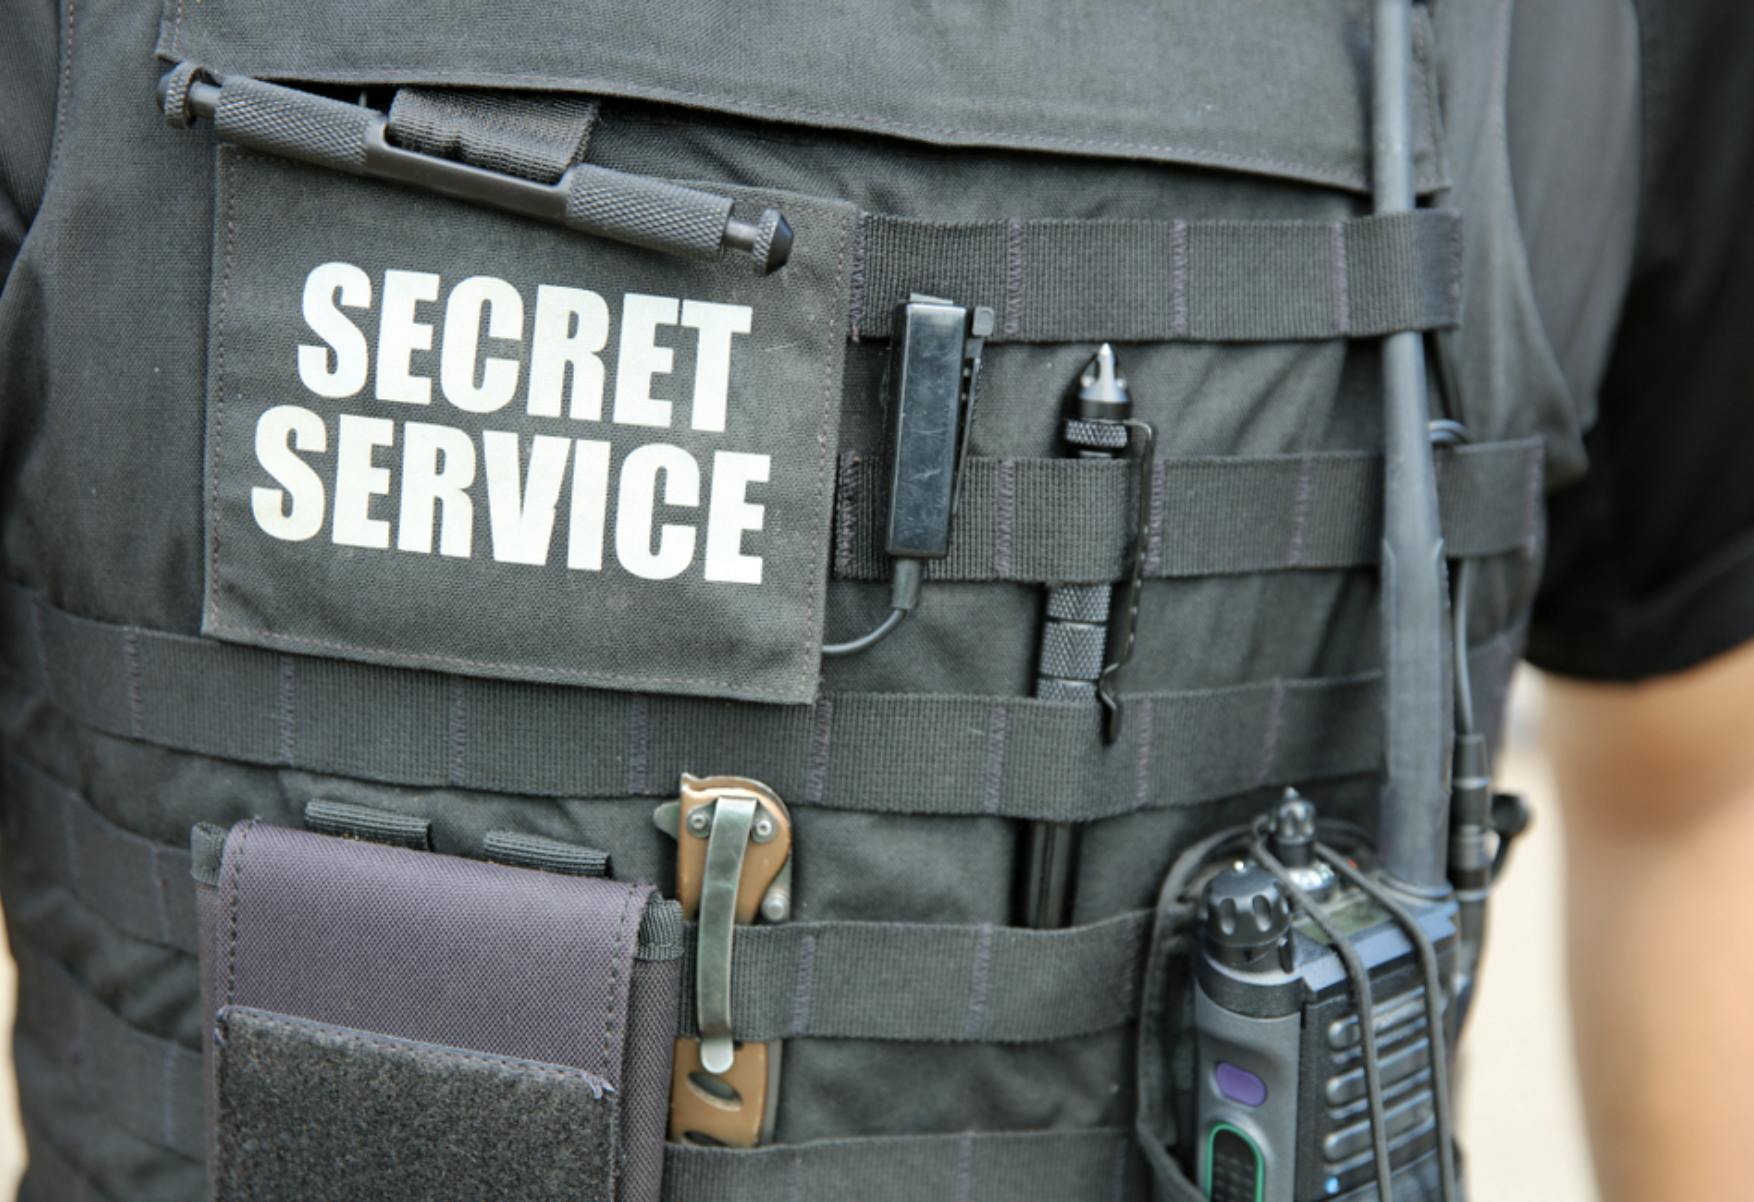 Image shows chest of a person with a bullet proof vest and the words 'secret service' on it. Related to: cybercrime, cybercrimes, financial cybercrimes, AI, AI automation, Artificial intelligence initiative, analyzing data records, automated data record system, law enforcement ai integration, federal agency ai integration.